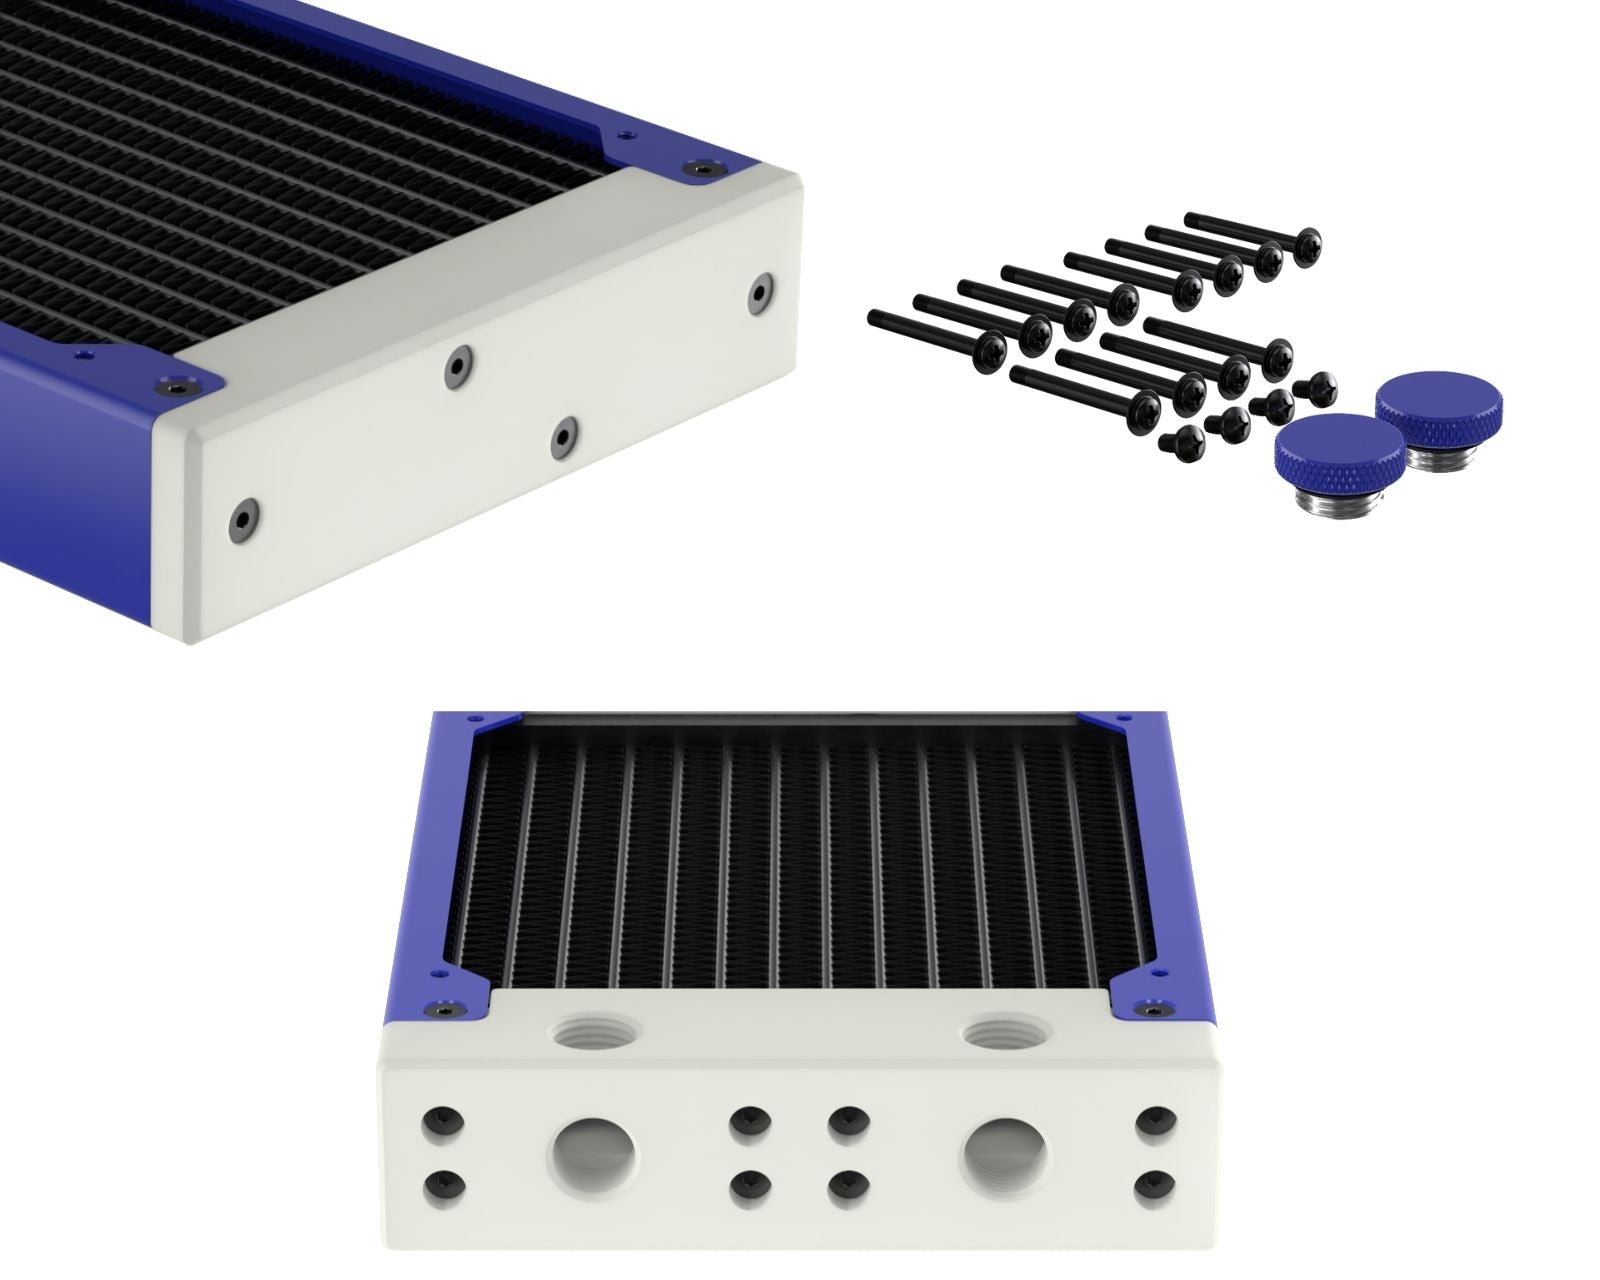 PrimoChill 360SL (30mm) EXIMO Modular Radiator, White POM, 3x120mm, Triple Fan (R-SL-W36) Available in 20+ Colors, Assembled in USA and Custom Watercooling Loop Ready - True Blue